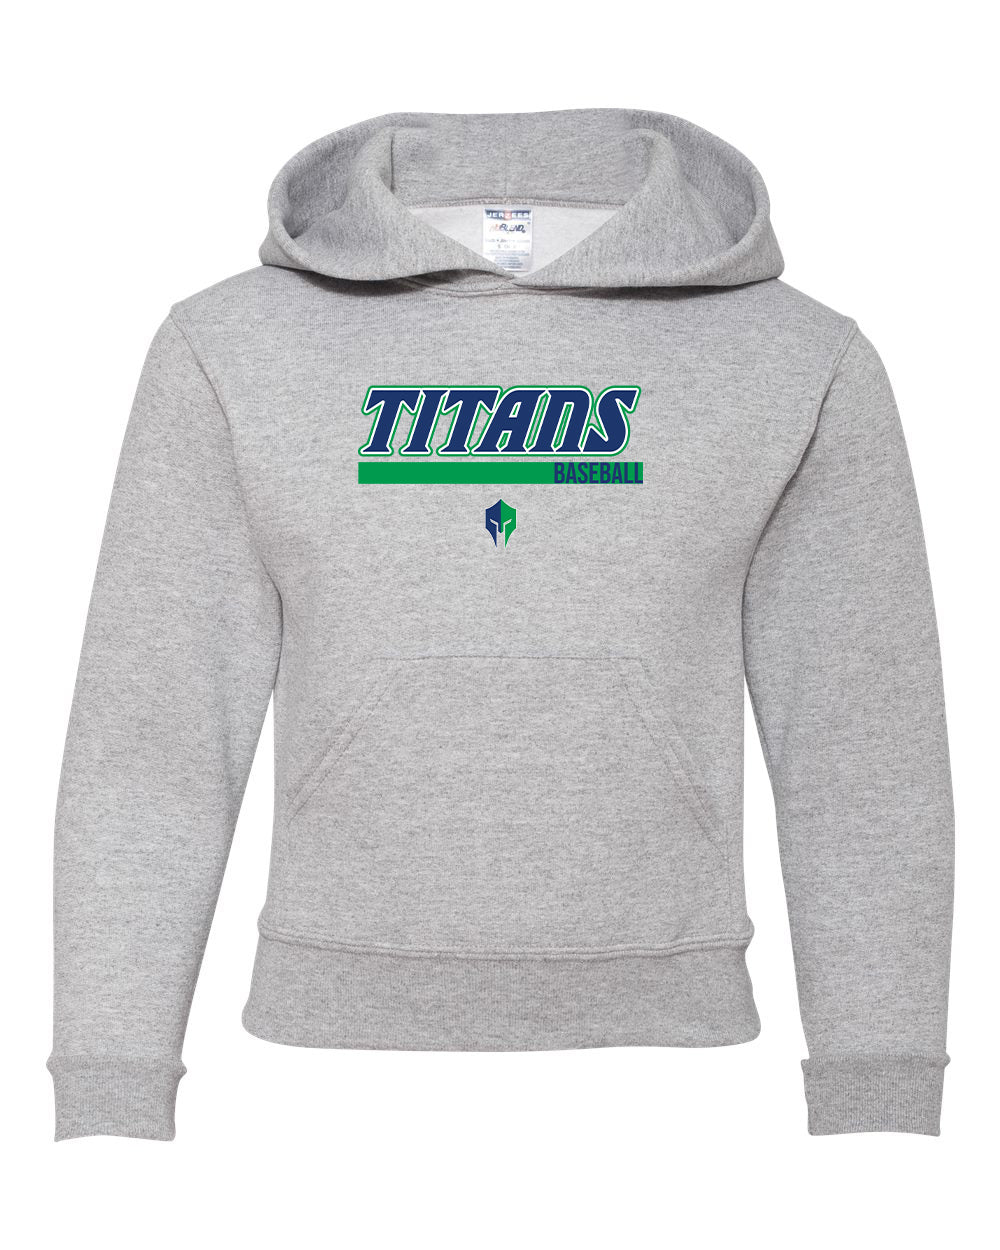 Titans Youth Hoodie "Rectangle" - 996Y (color options available)